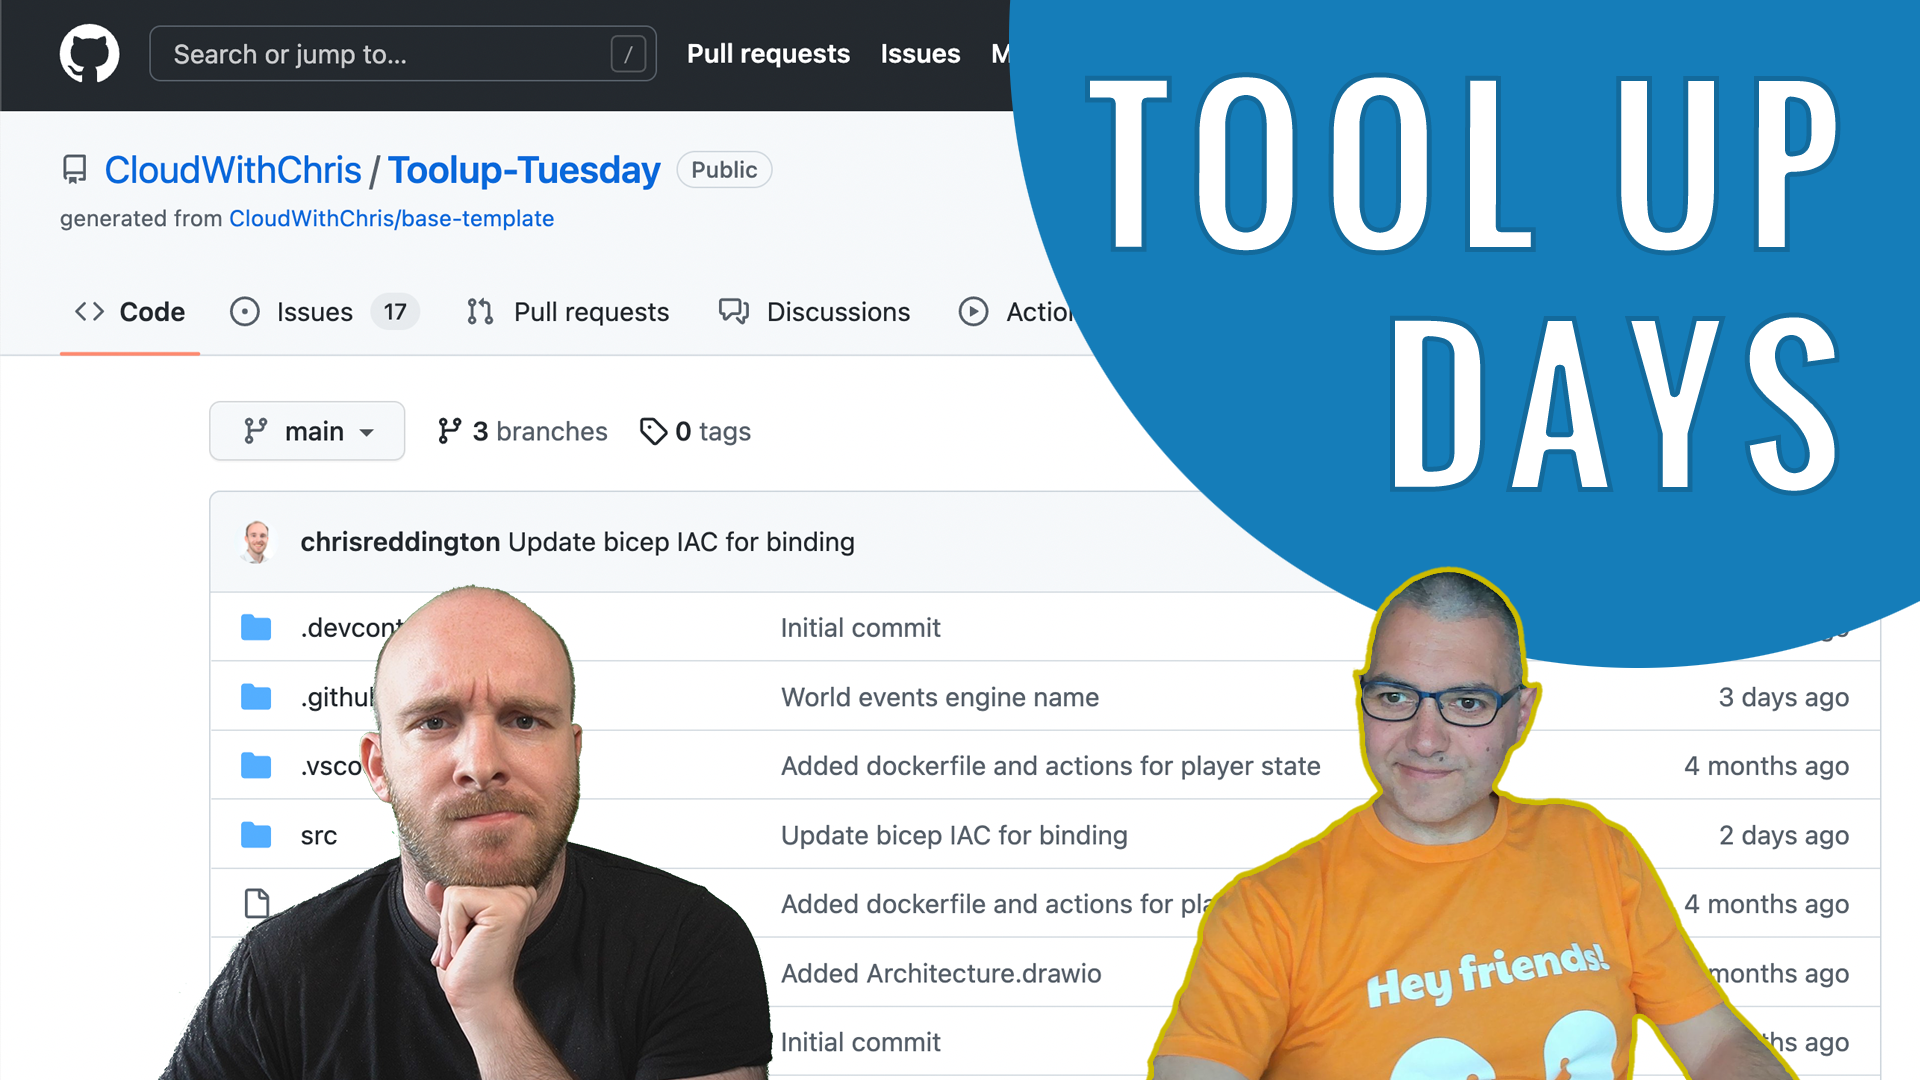 ToolUp Day #10